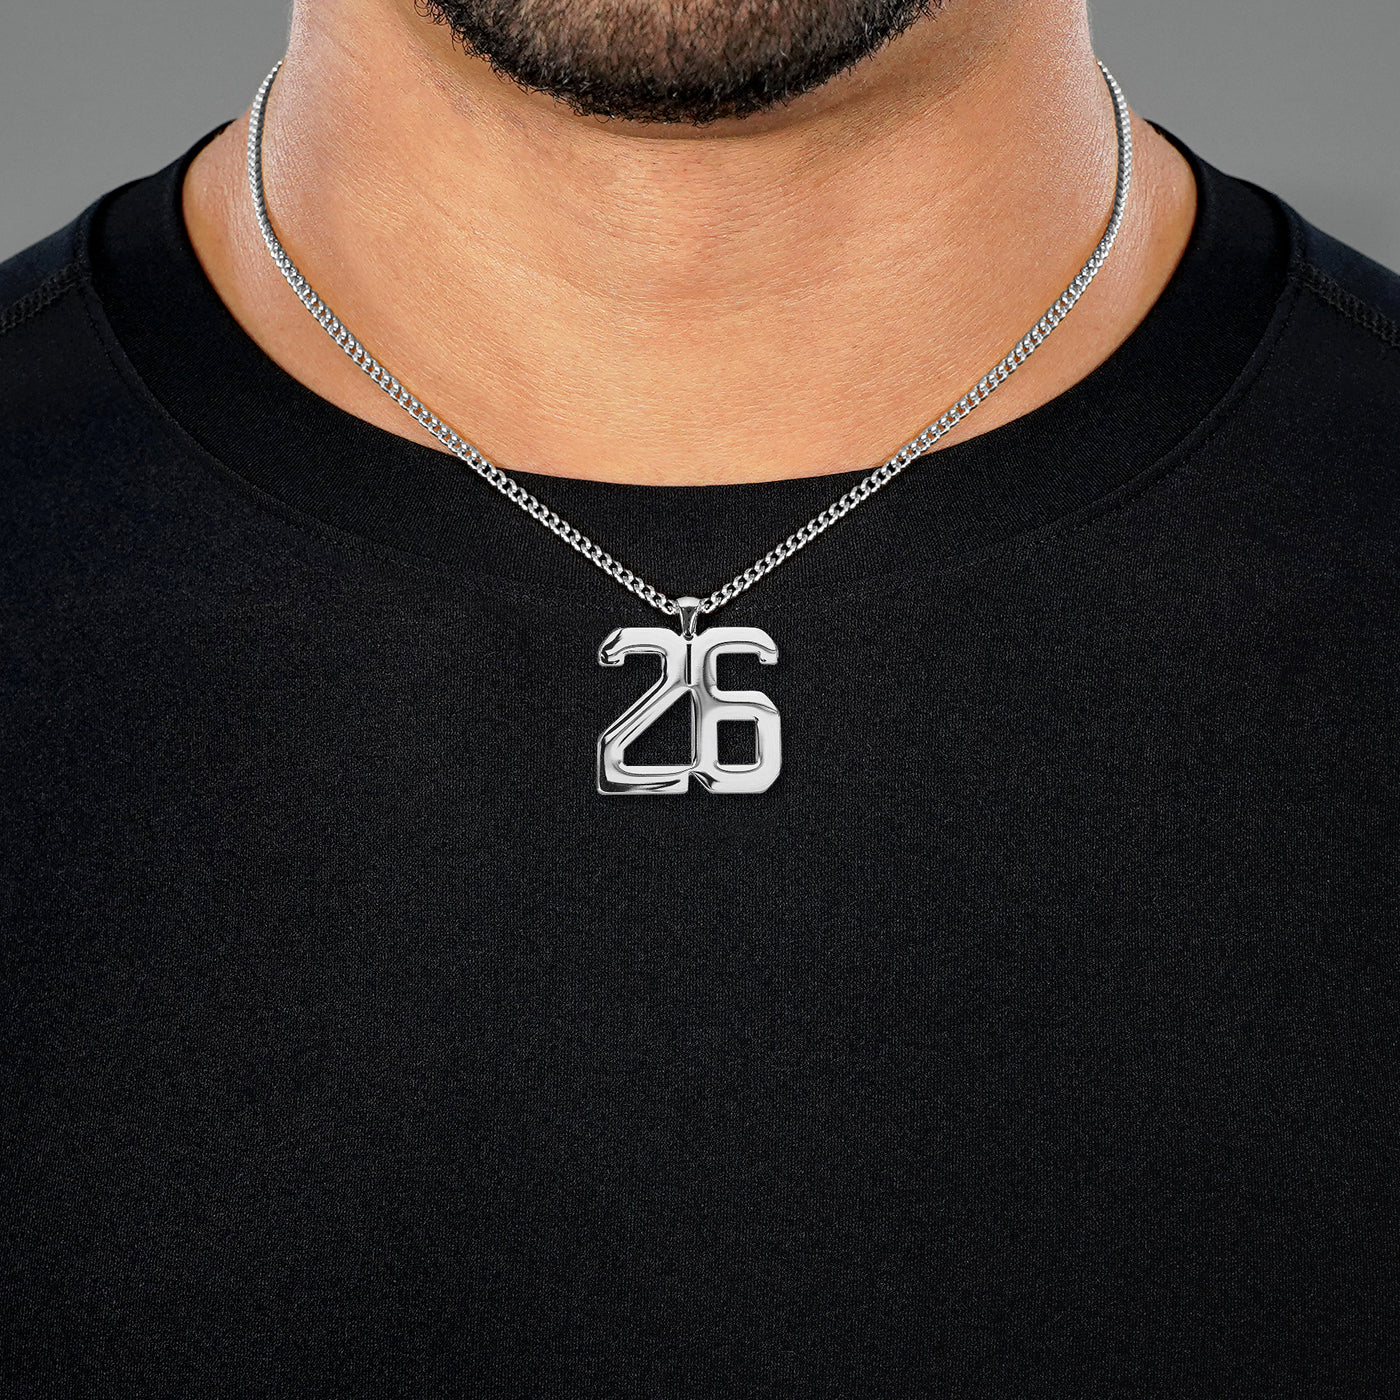 26 Number Pendant with Chain Necklace - Stainless Steel